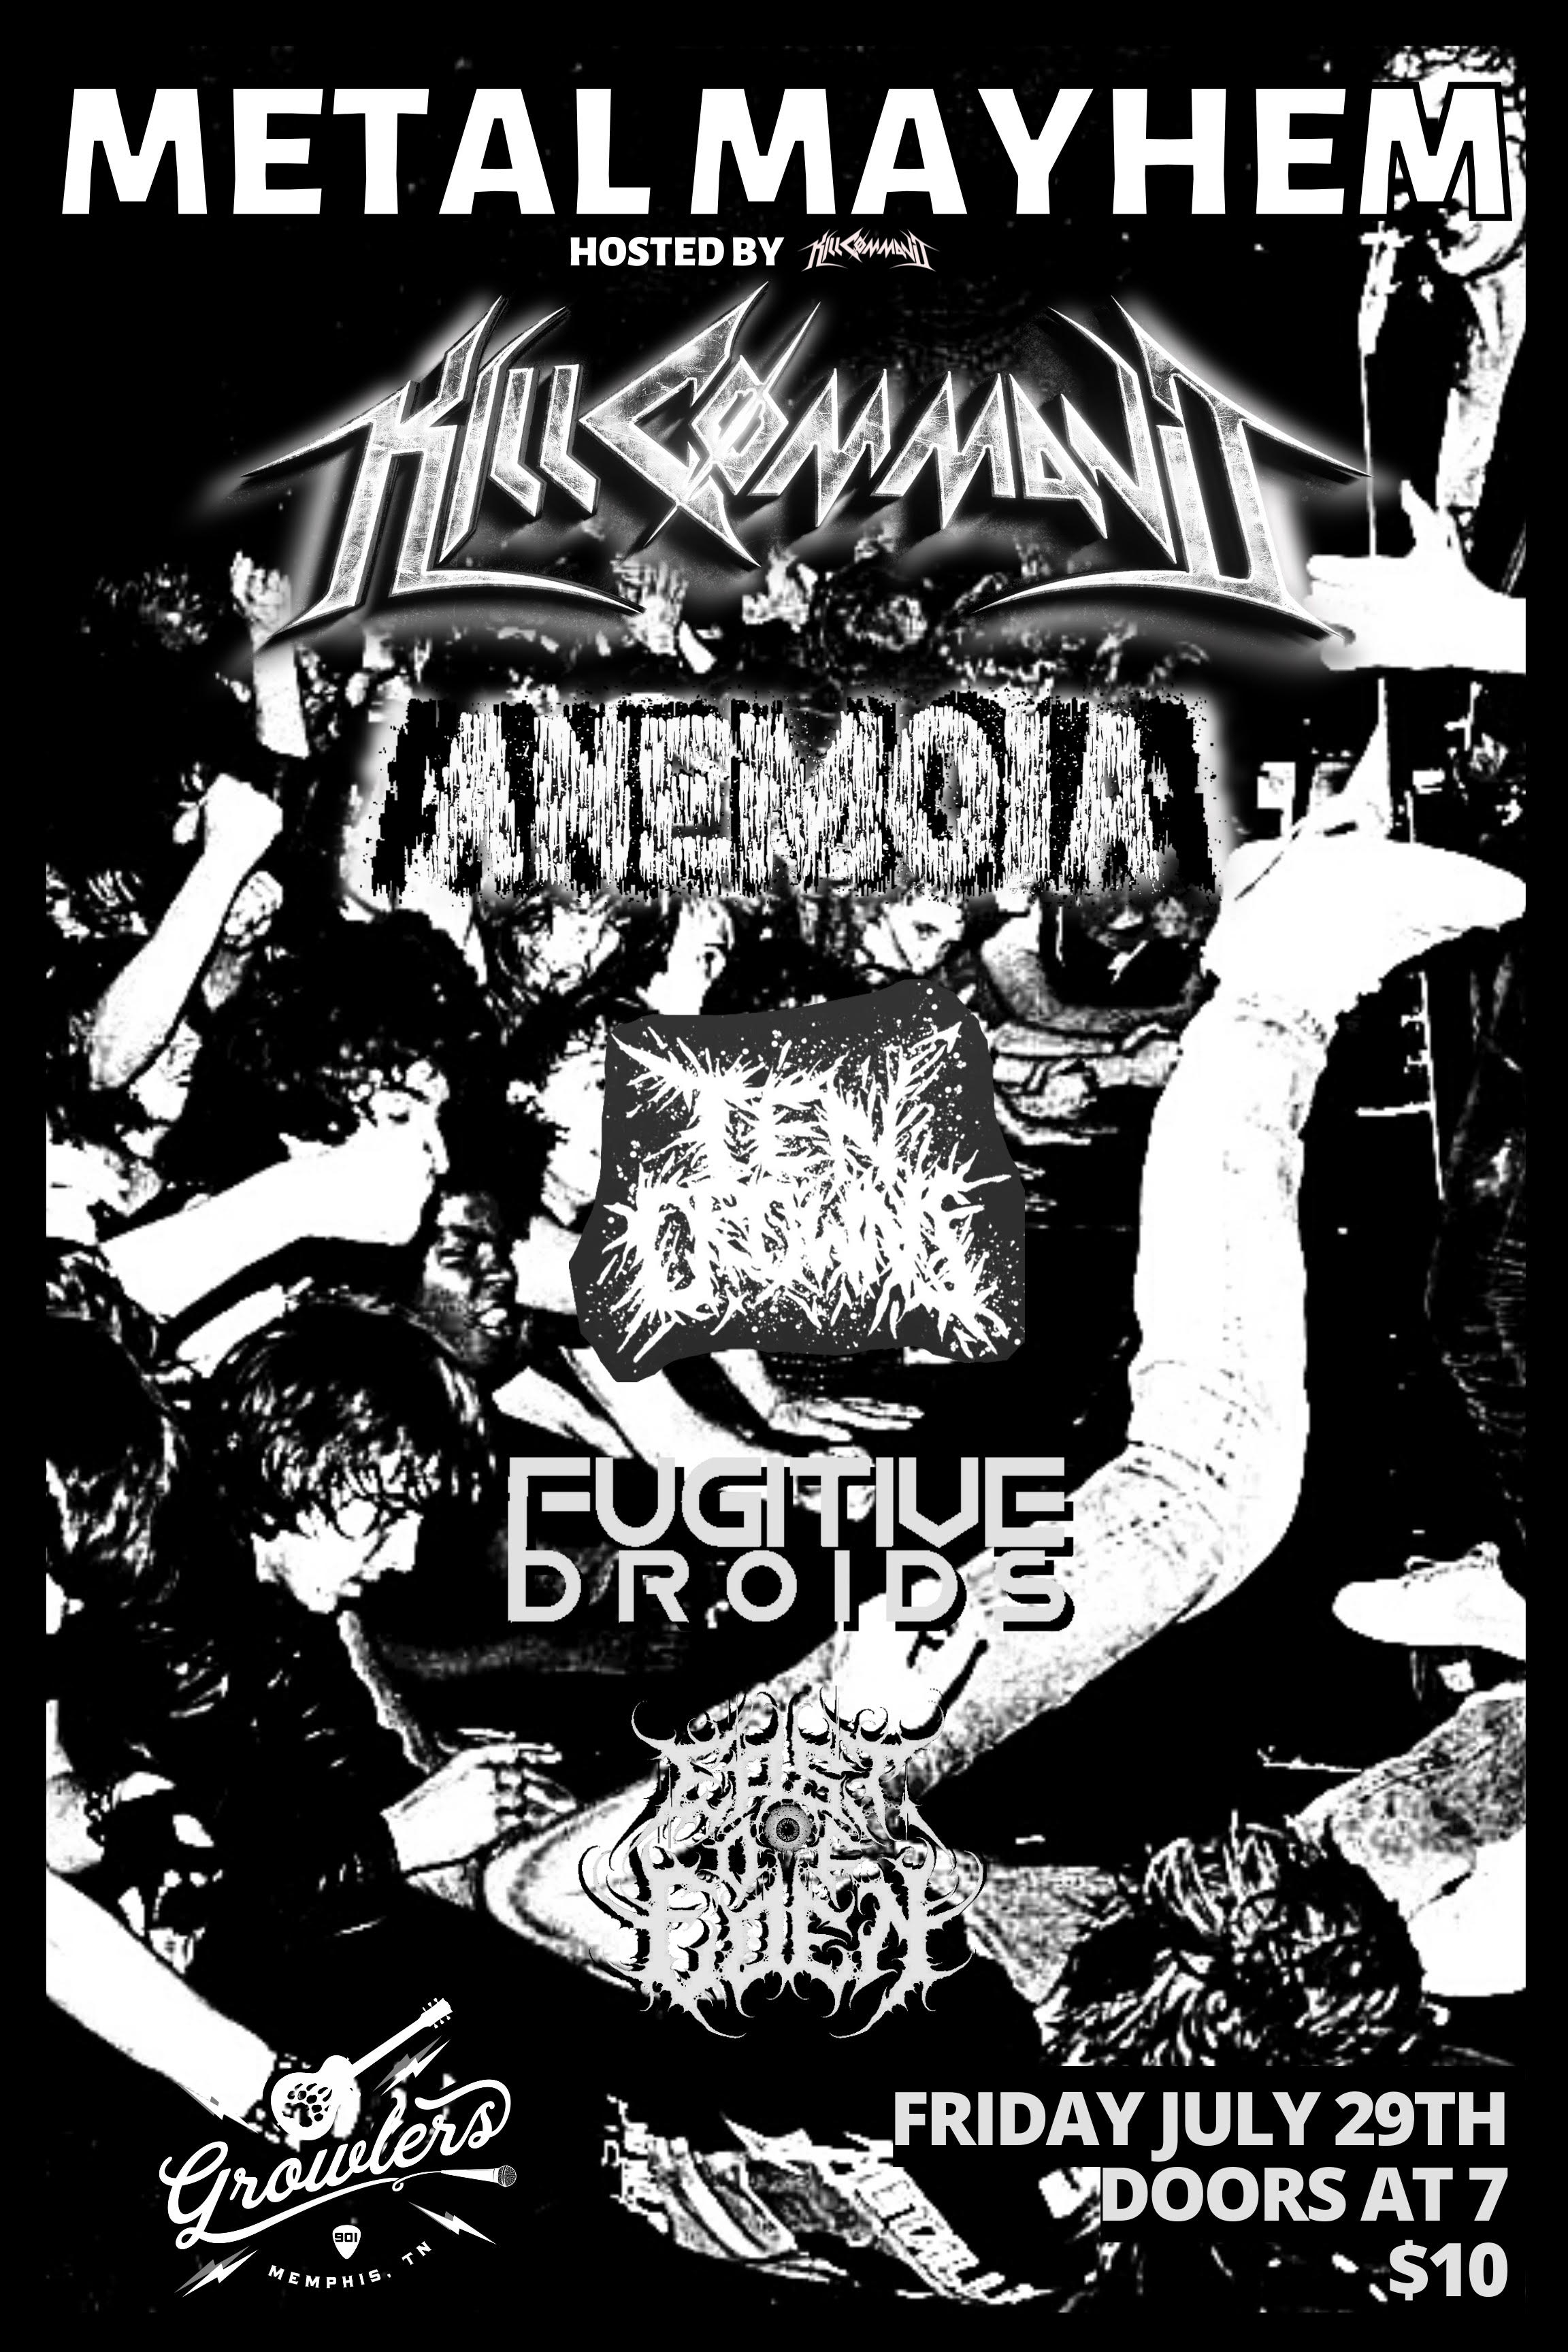 Buy Tickets to Metal Mayhem hosted by Kill Command in Memphis on Jul 29